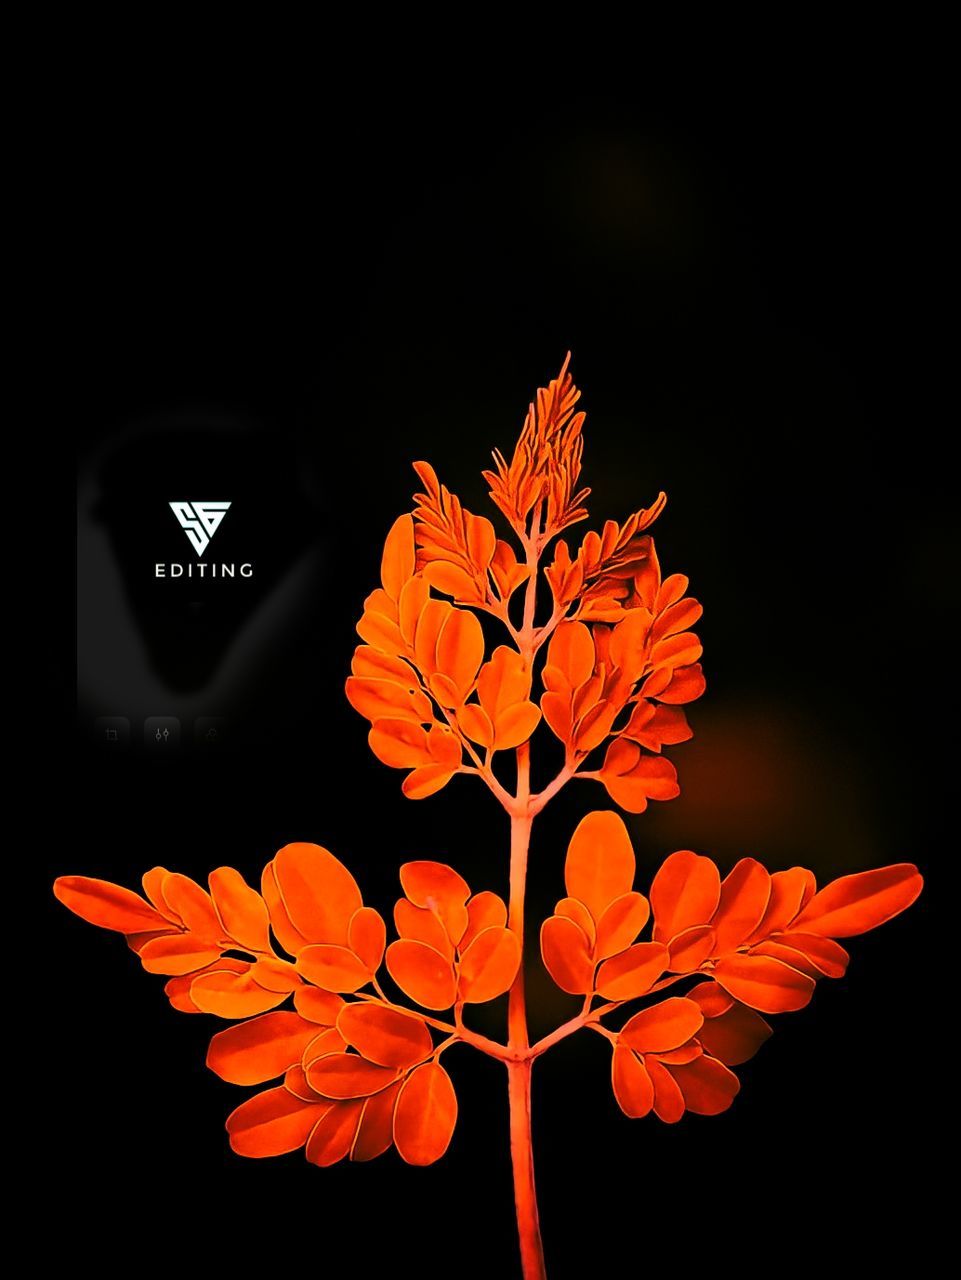 plant, leaf, flower, beauty in nature, flowering plant, nature, black background, branch, petal, orange color, no people, plant part, tree, fragility, close-up, yellow, freshness, maple leaf, outdoors, studio shot, macro photography, growth, flower head, night